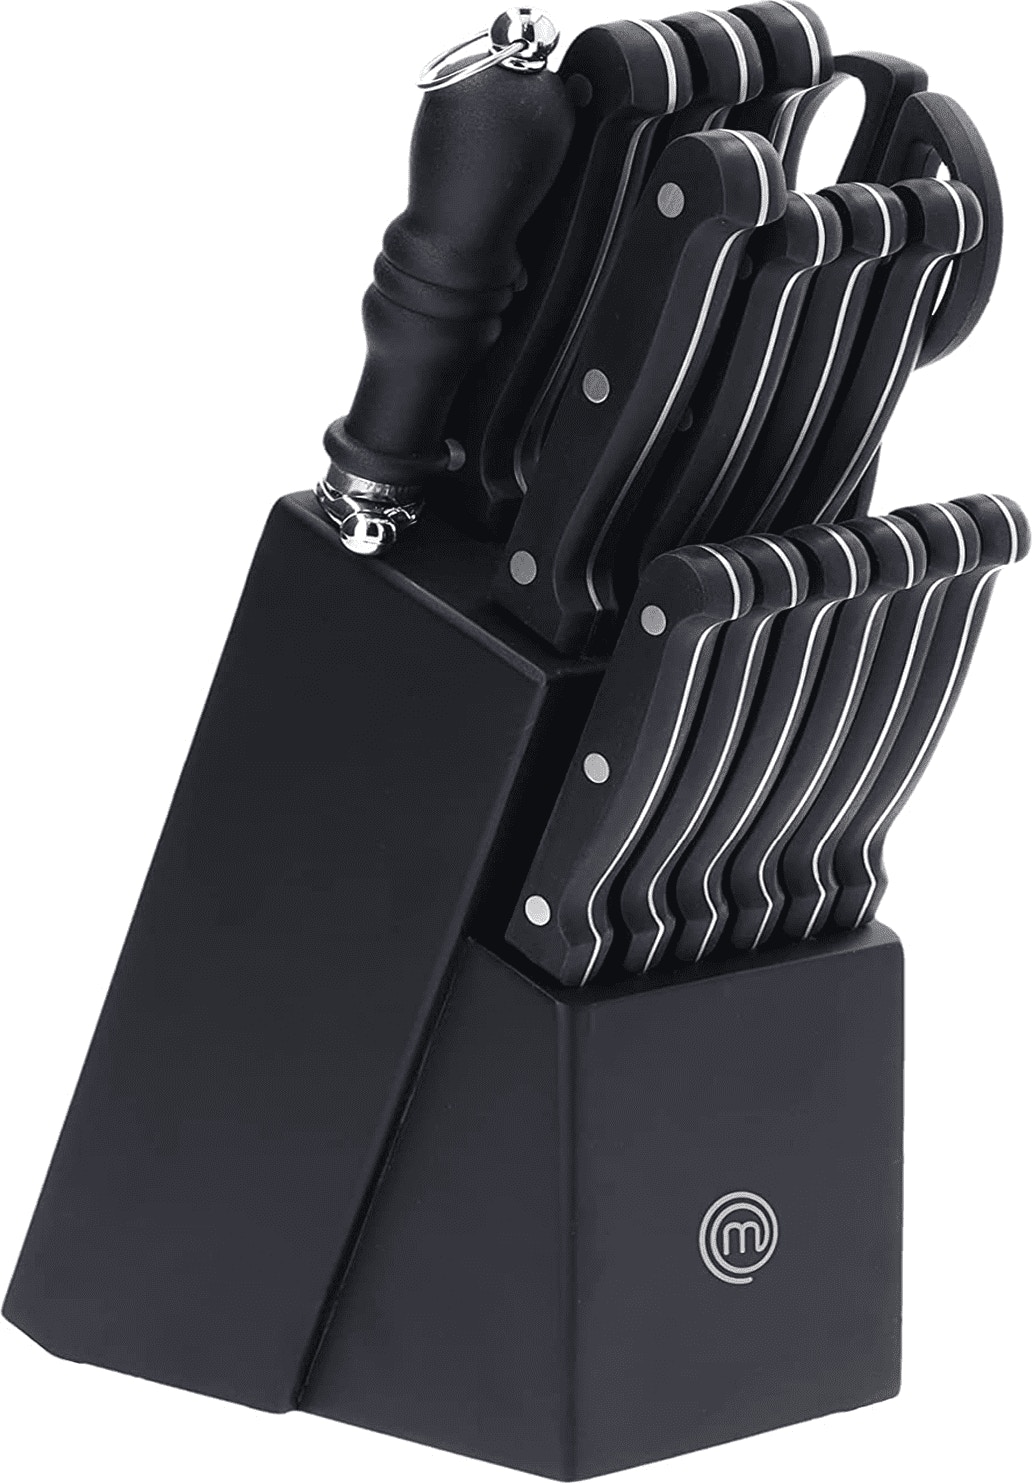 Pampered chef knife block - household items - by owner - housewares sale -  craigslist